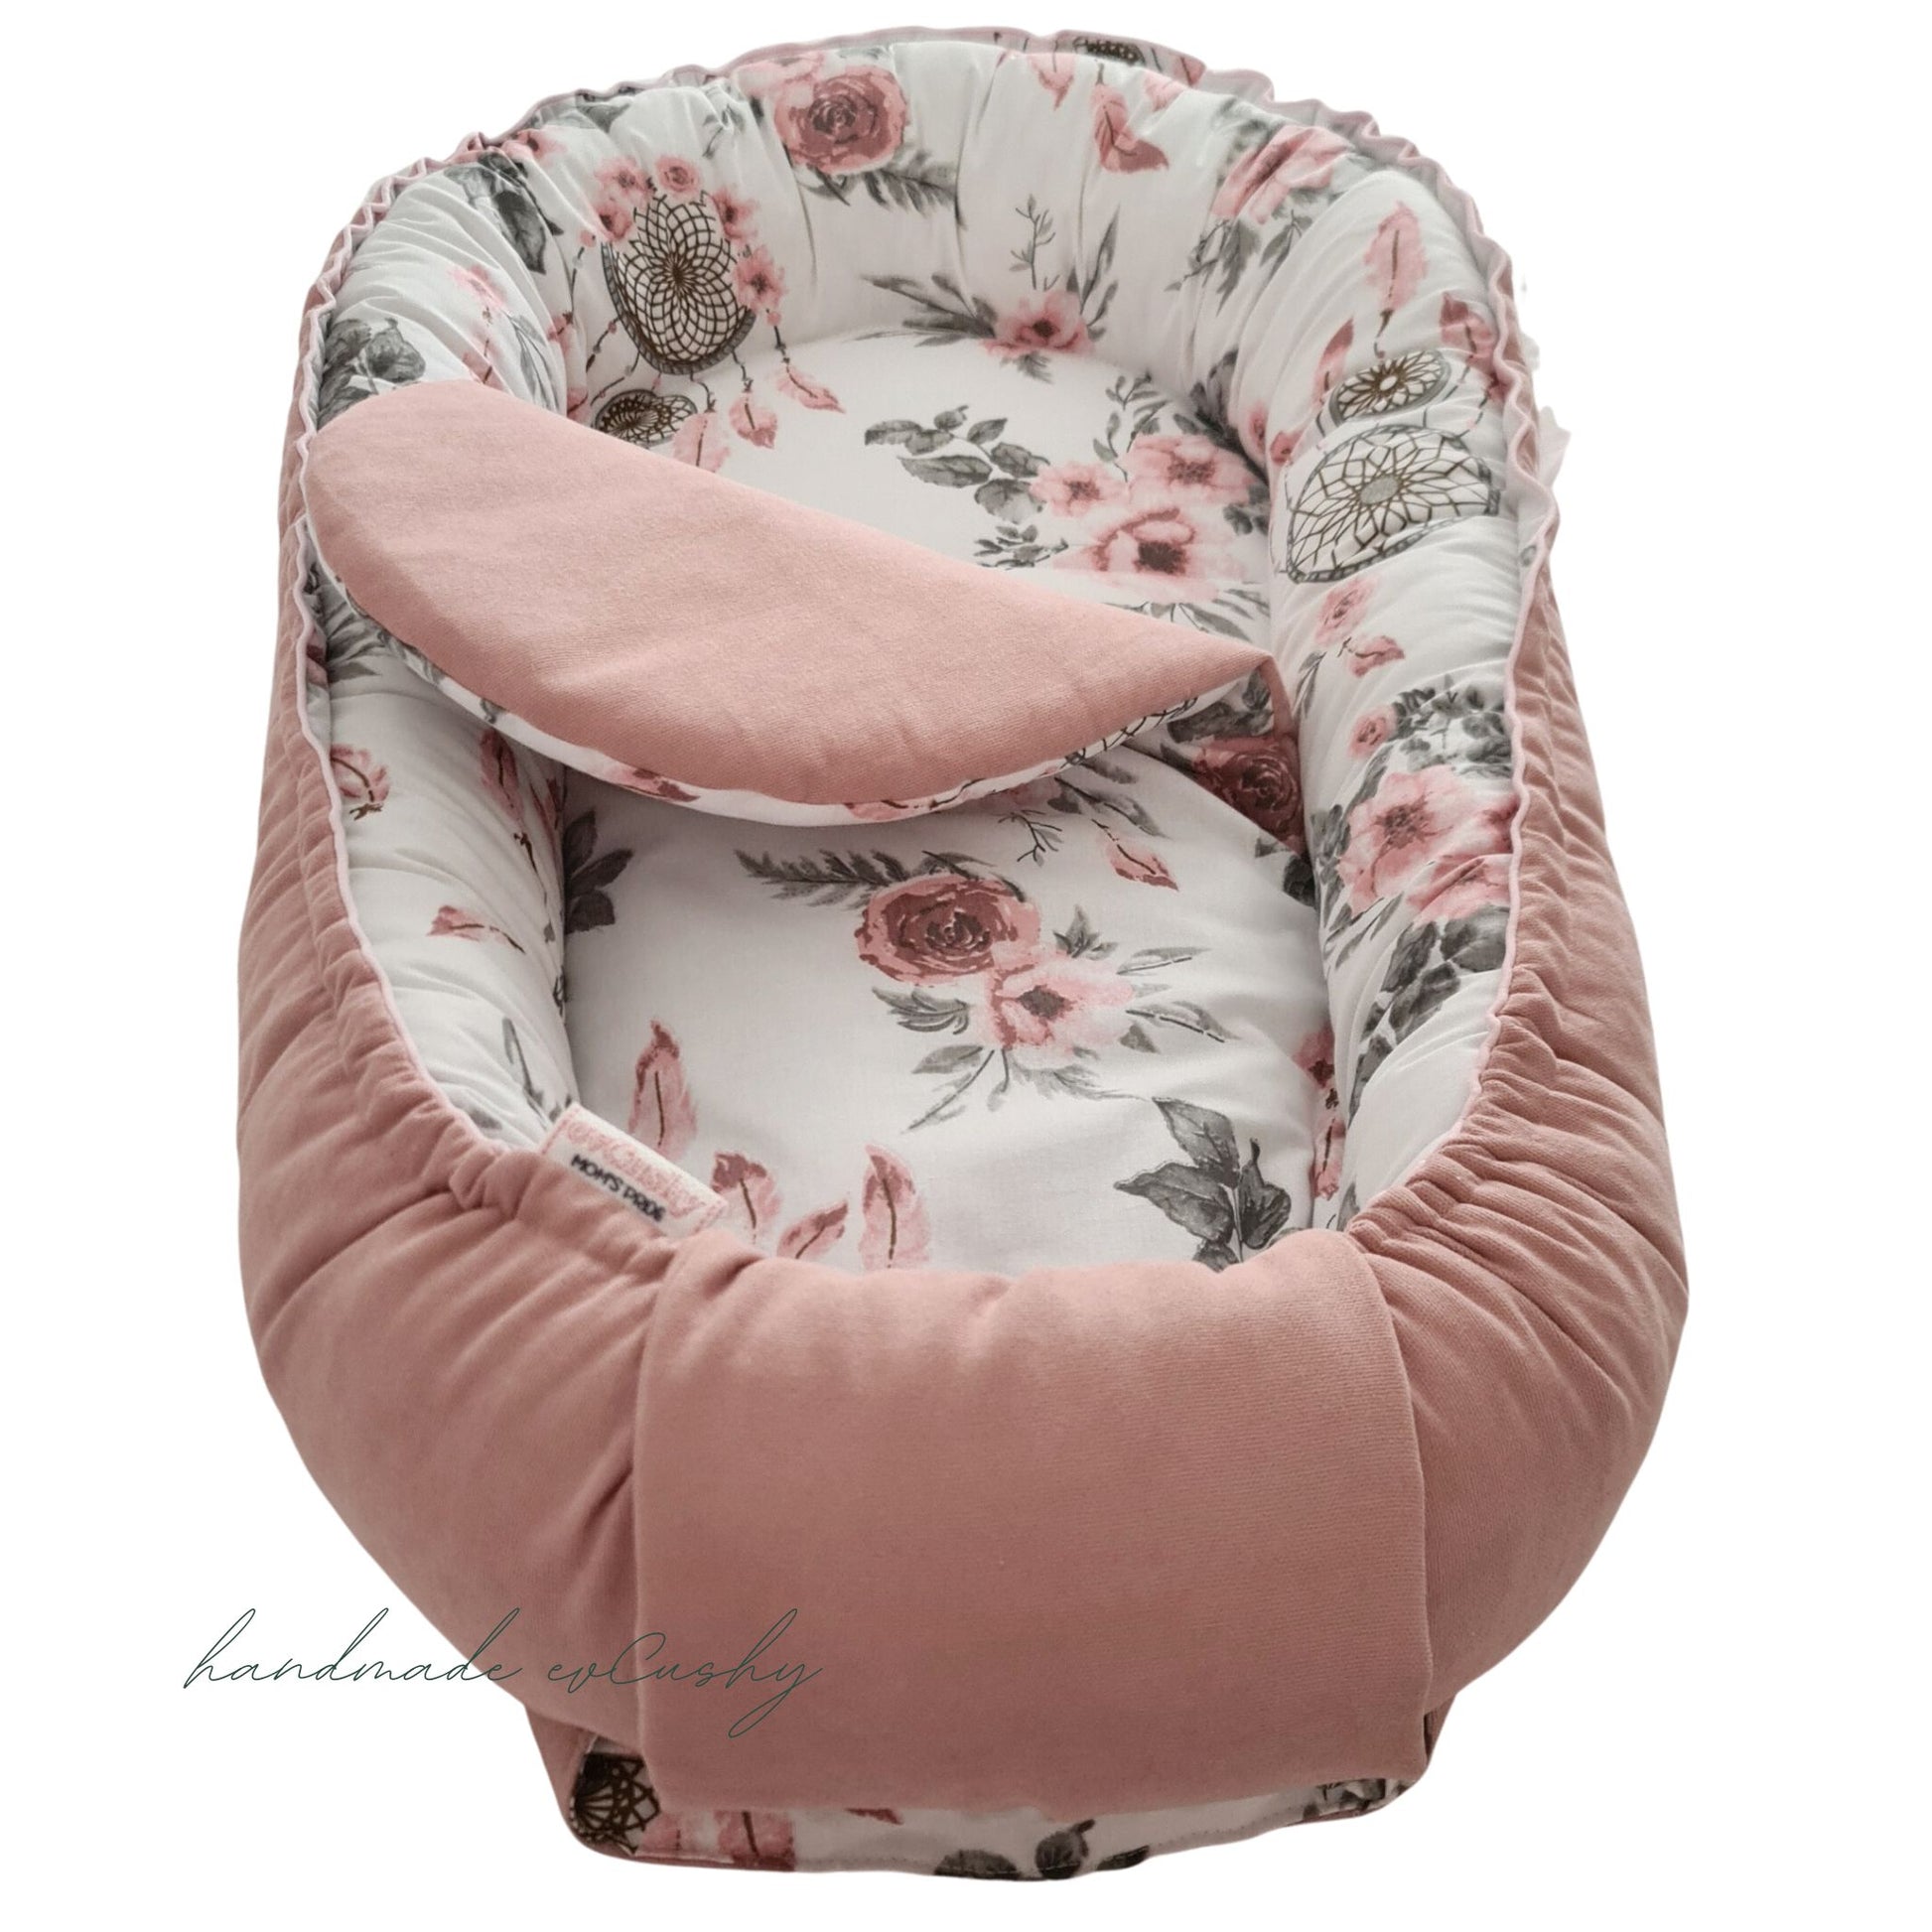 comfortable evcushy nest for infants. Suitable from Newborn till 9 months. Pink and dreams catchers